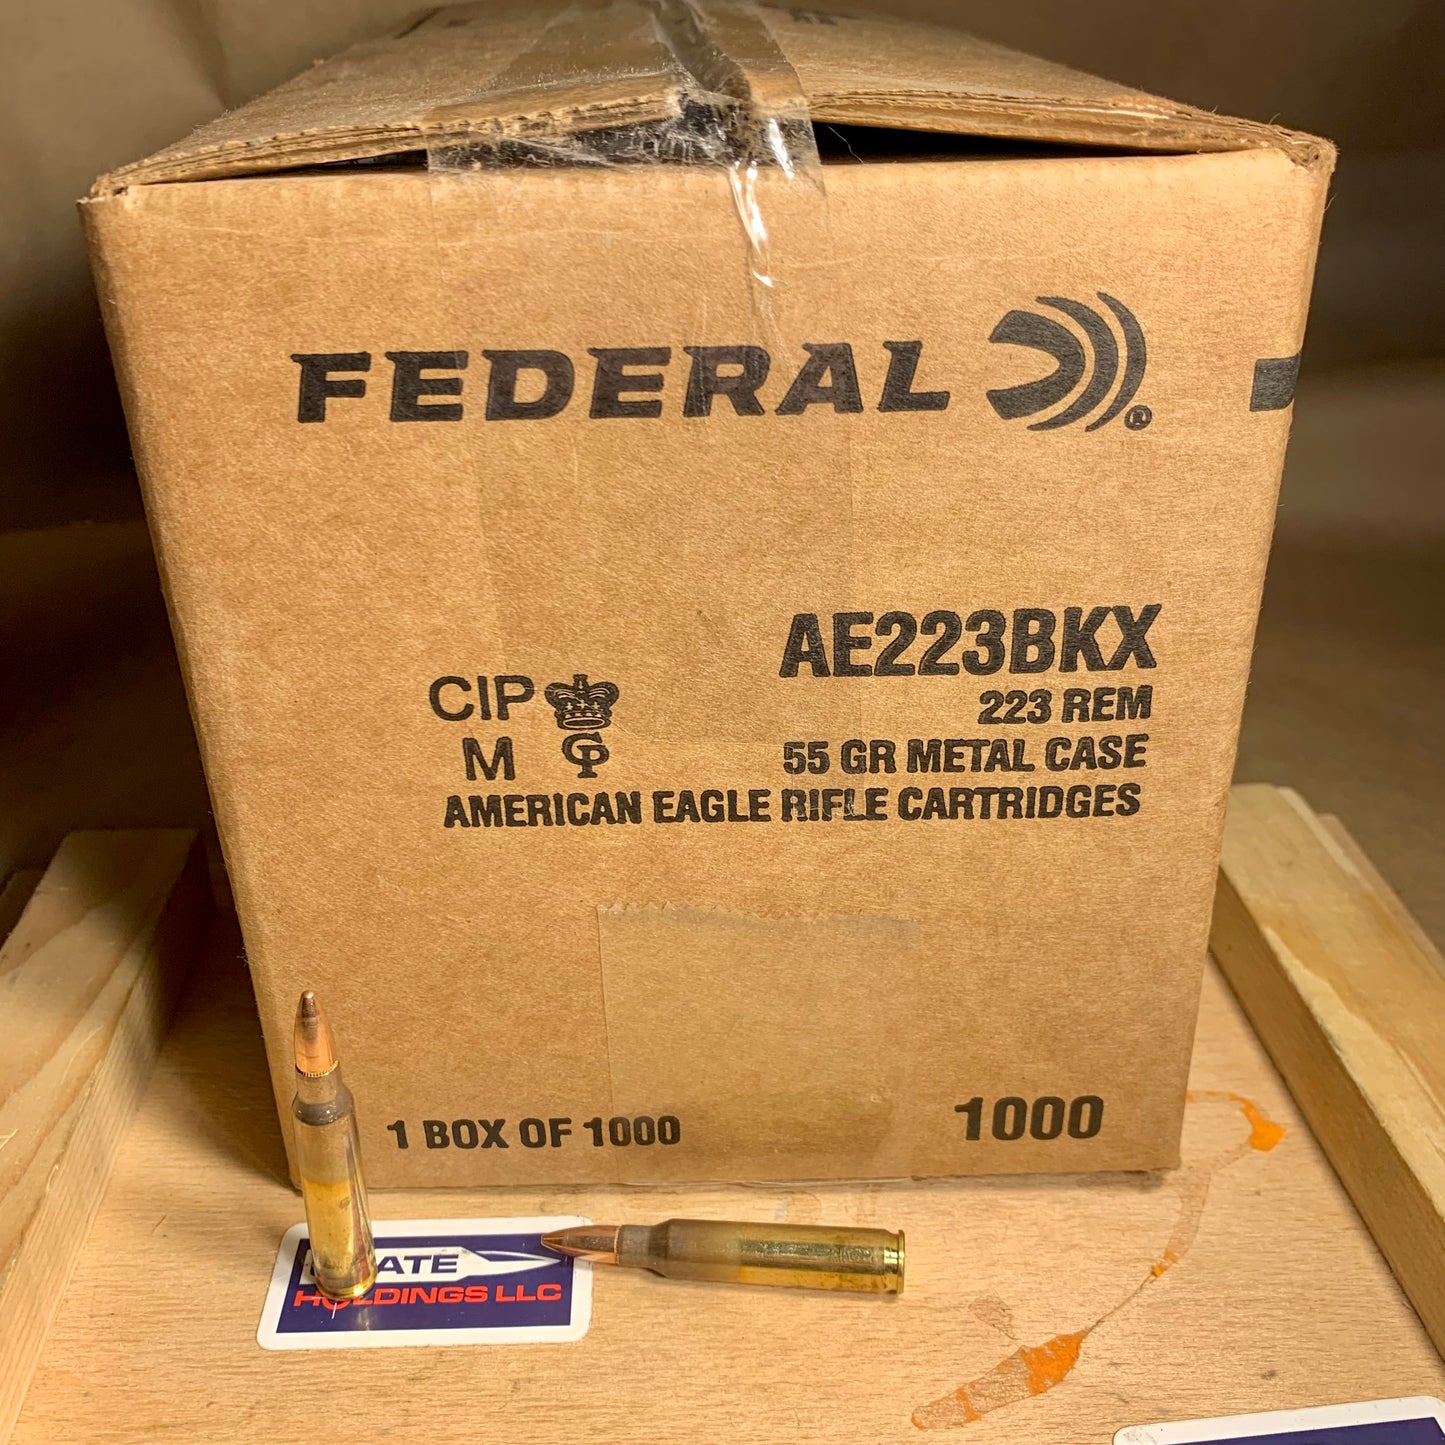 Free Shipping - 1000 Round Case Federal AE .223 Remington Ammo 55gr FMJ - AE223BKX Loose Pack